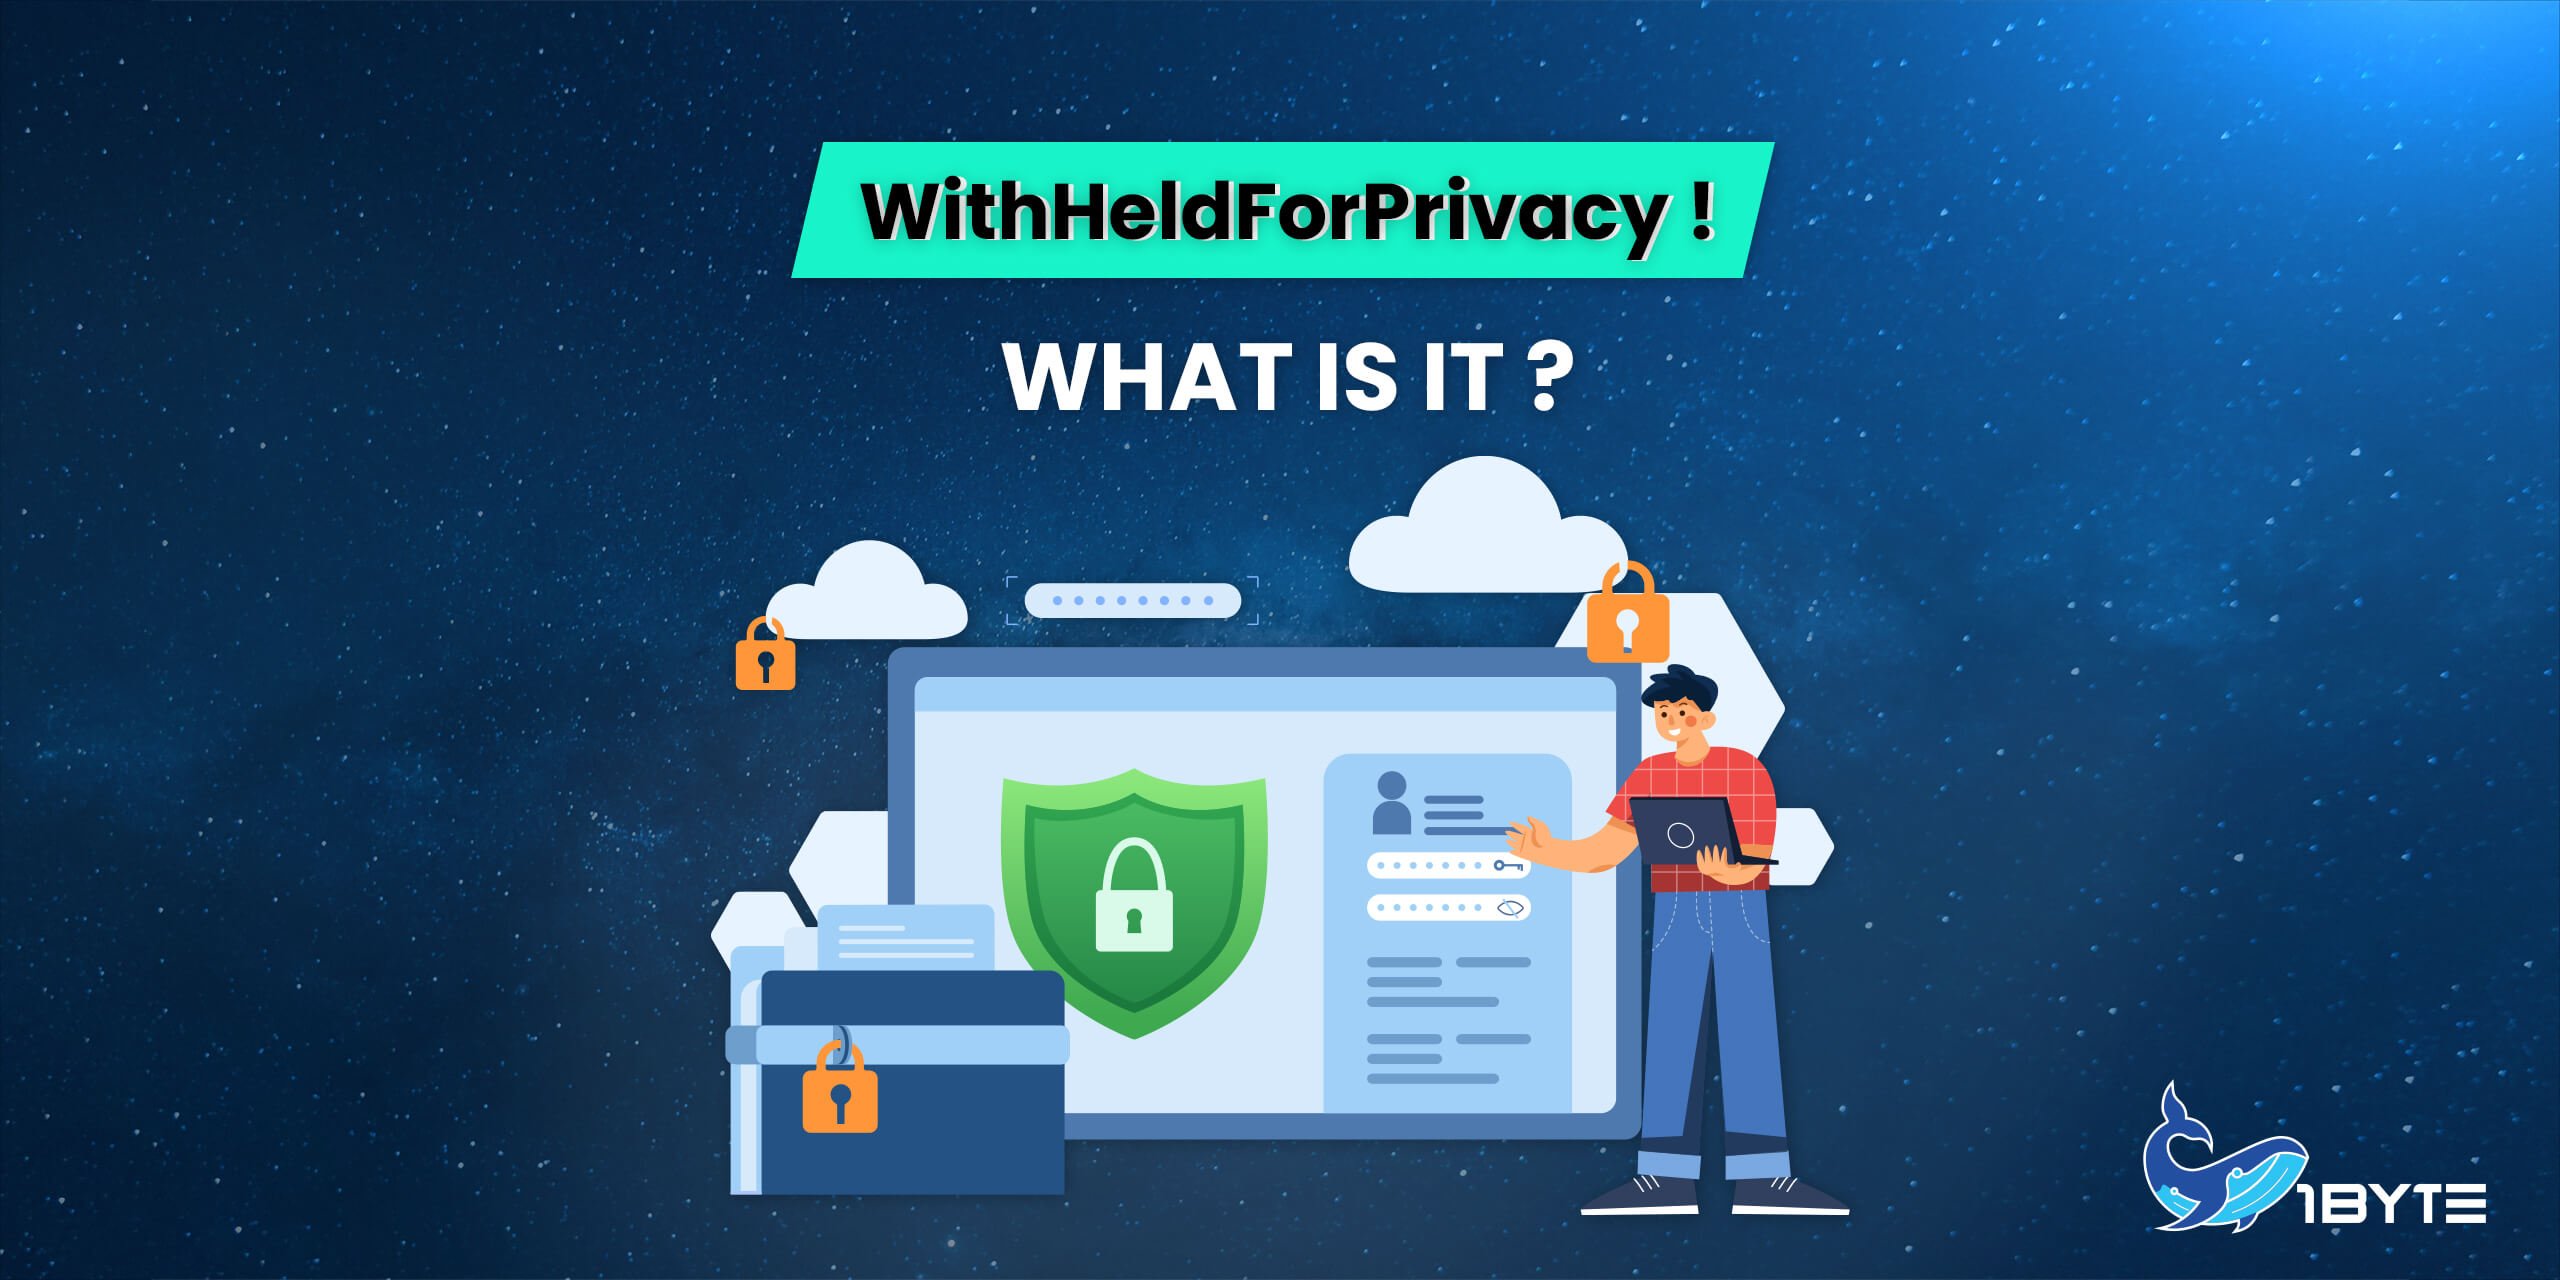 WithheldforPrivacy! What is it?